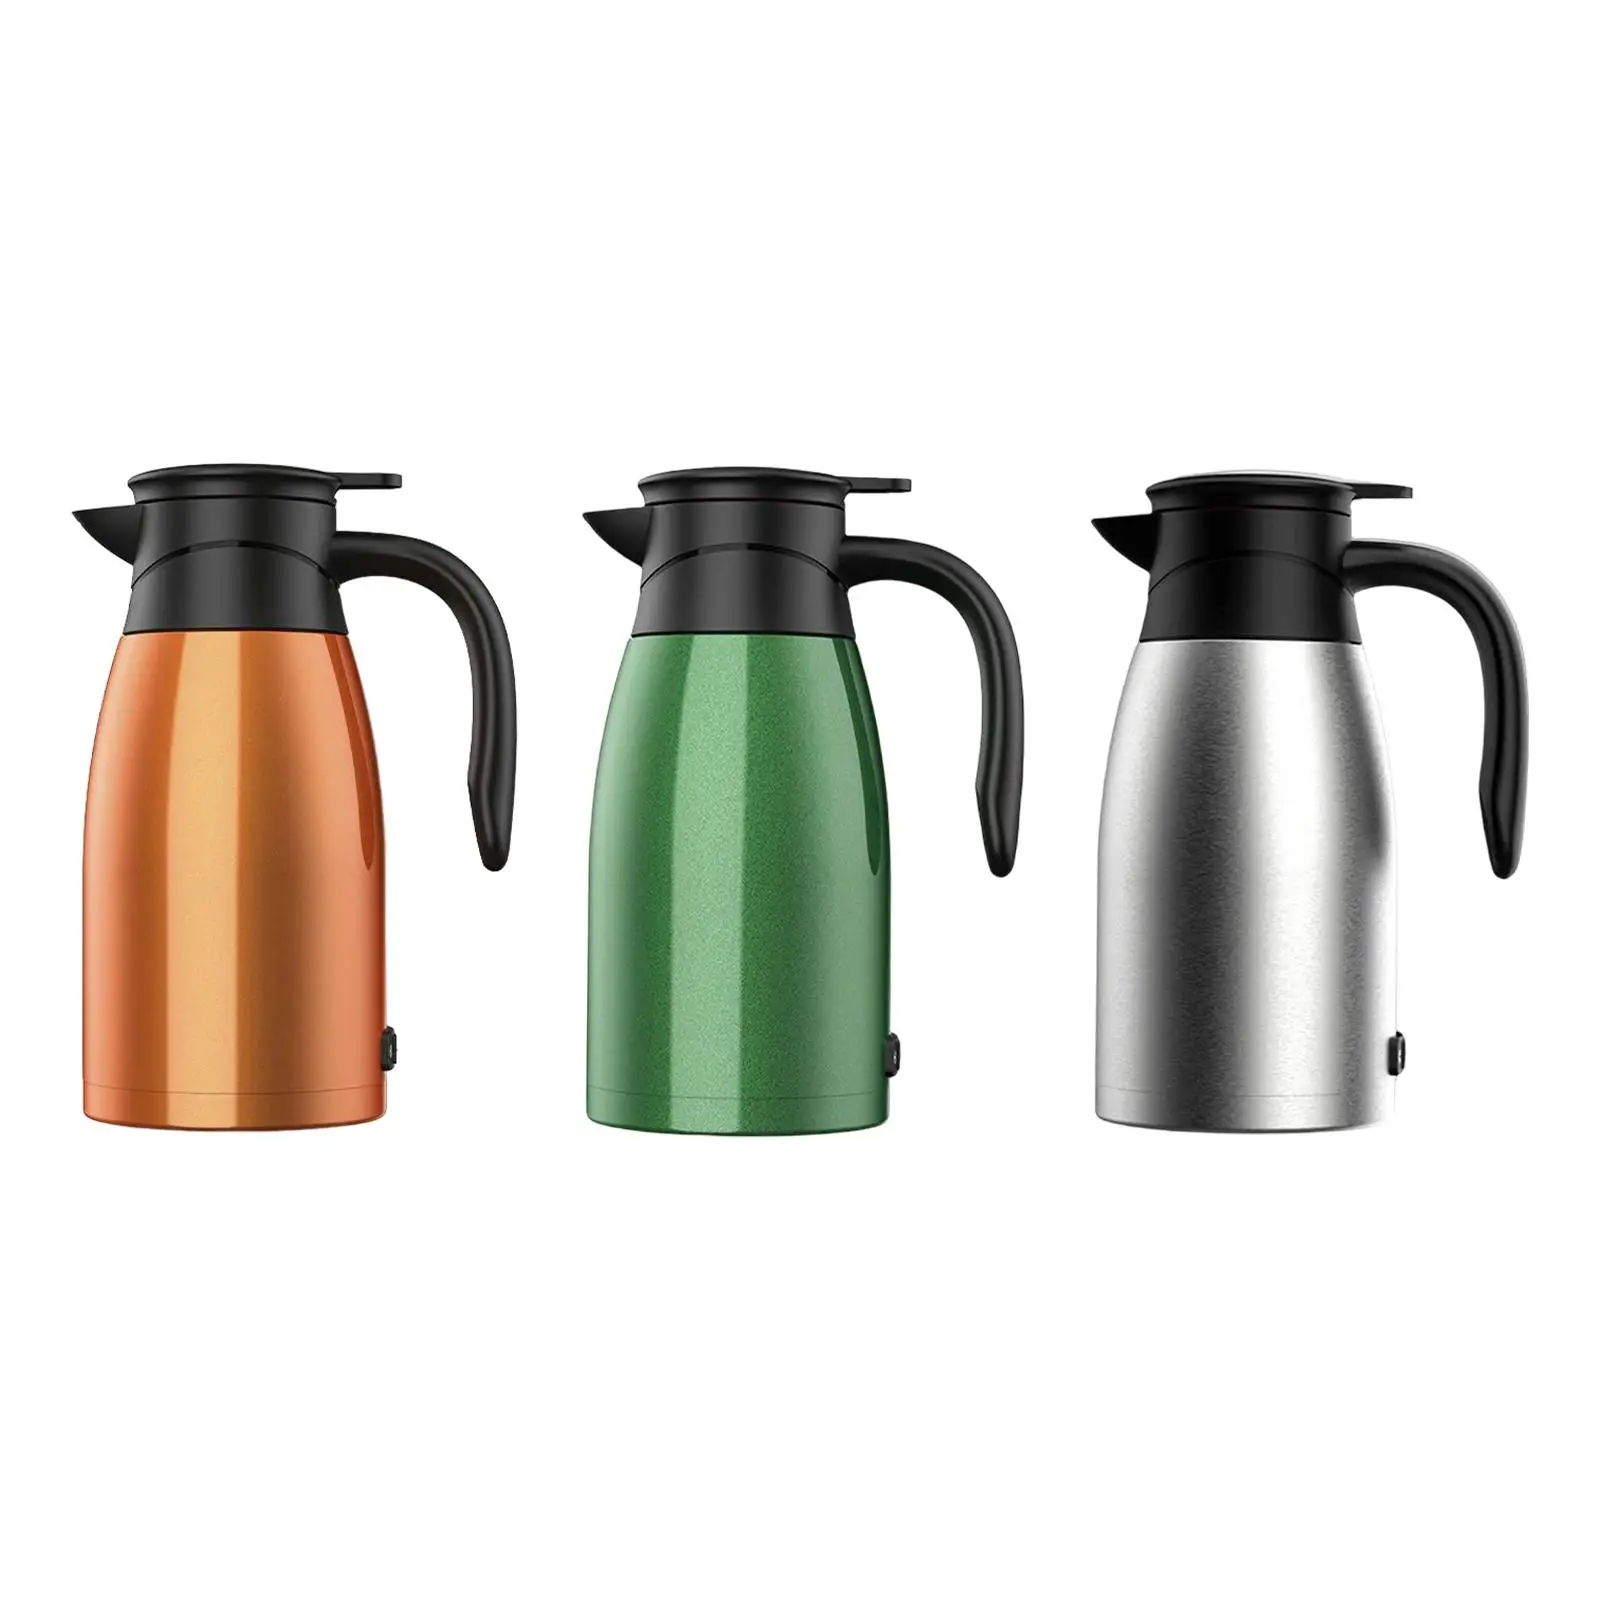 Portable 24V Car Truck Kettle Boiler 1400ml Intelligent Temp Display Heated Water Boiler Hot Water Kettle for Tea Camping